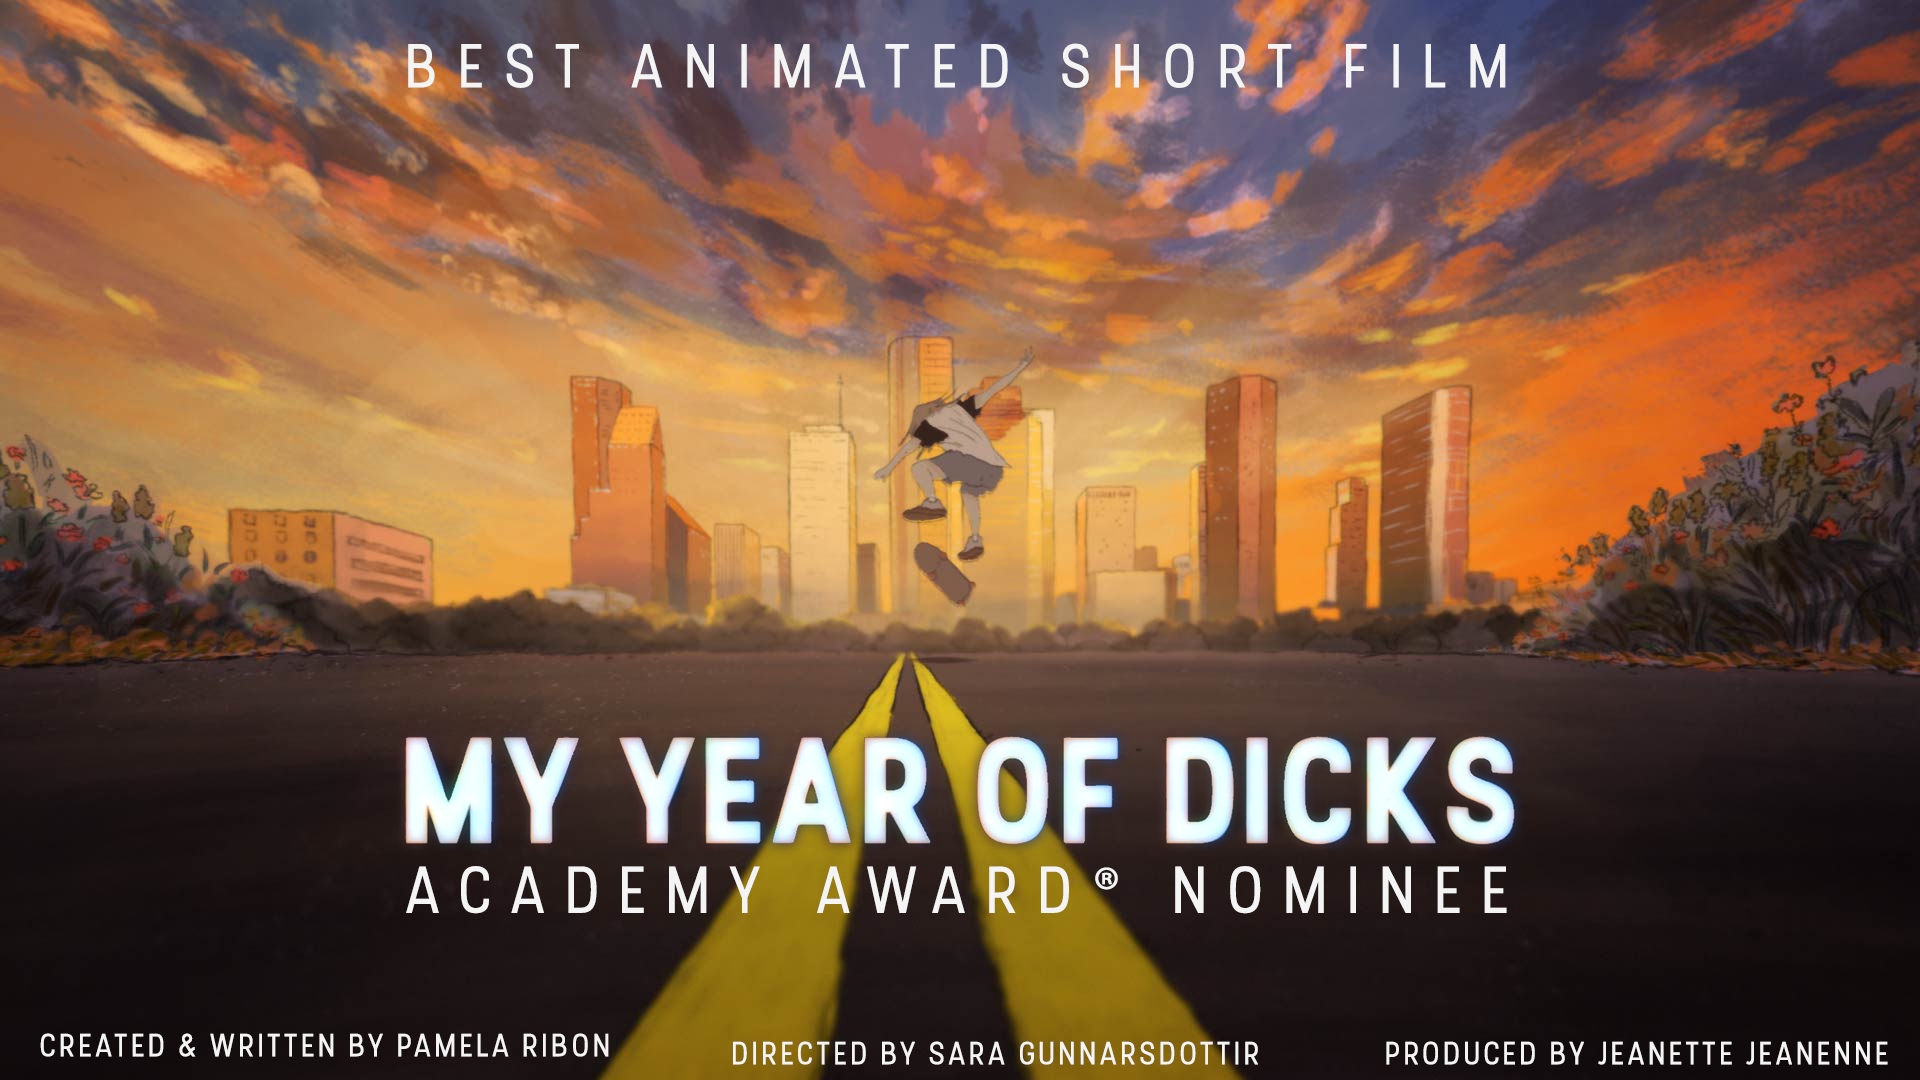 promotional poster for 'My Year of Dicks' short film